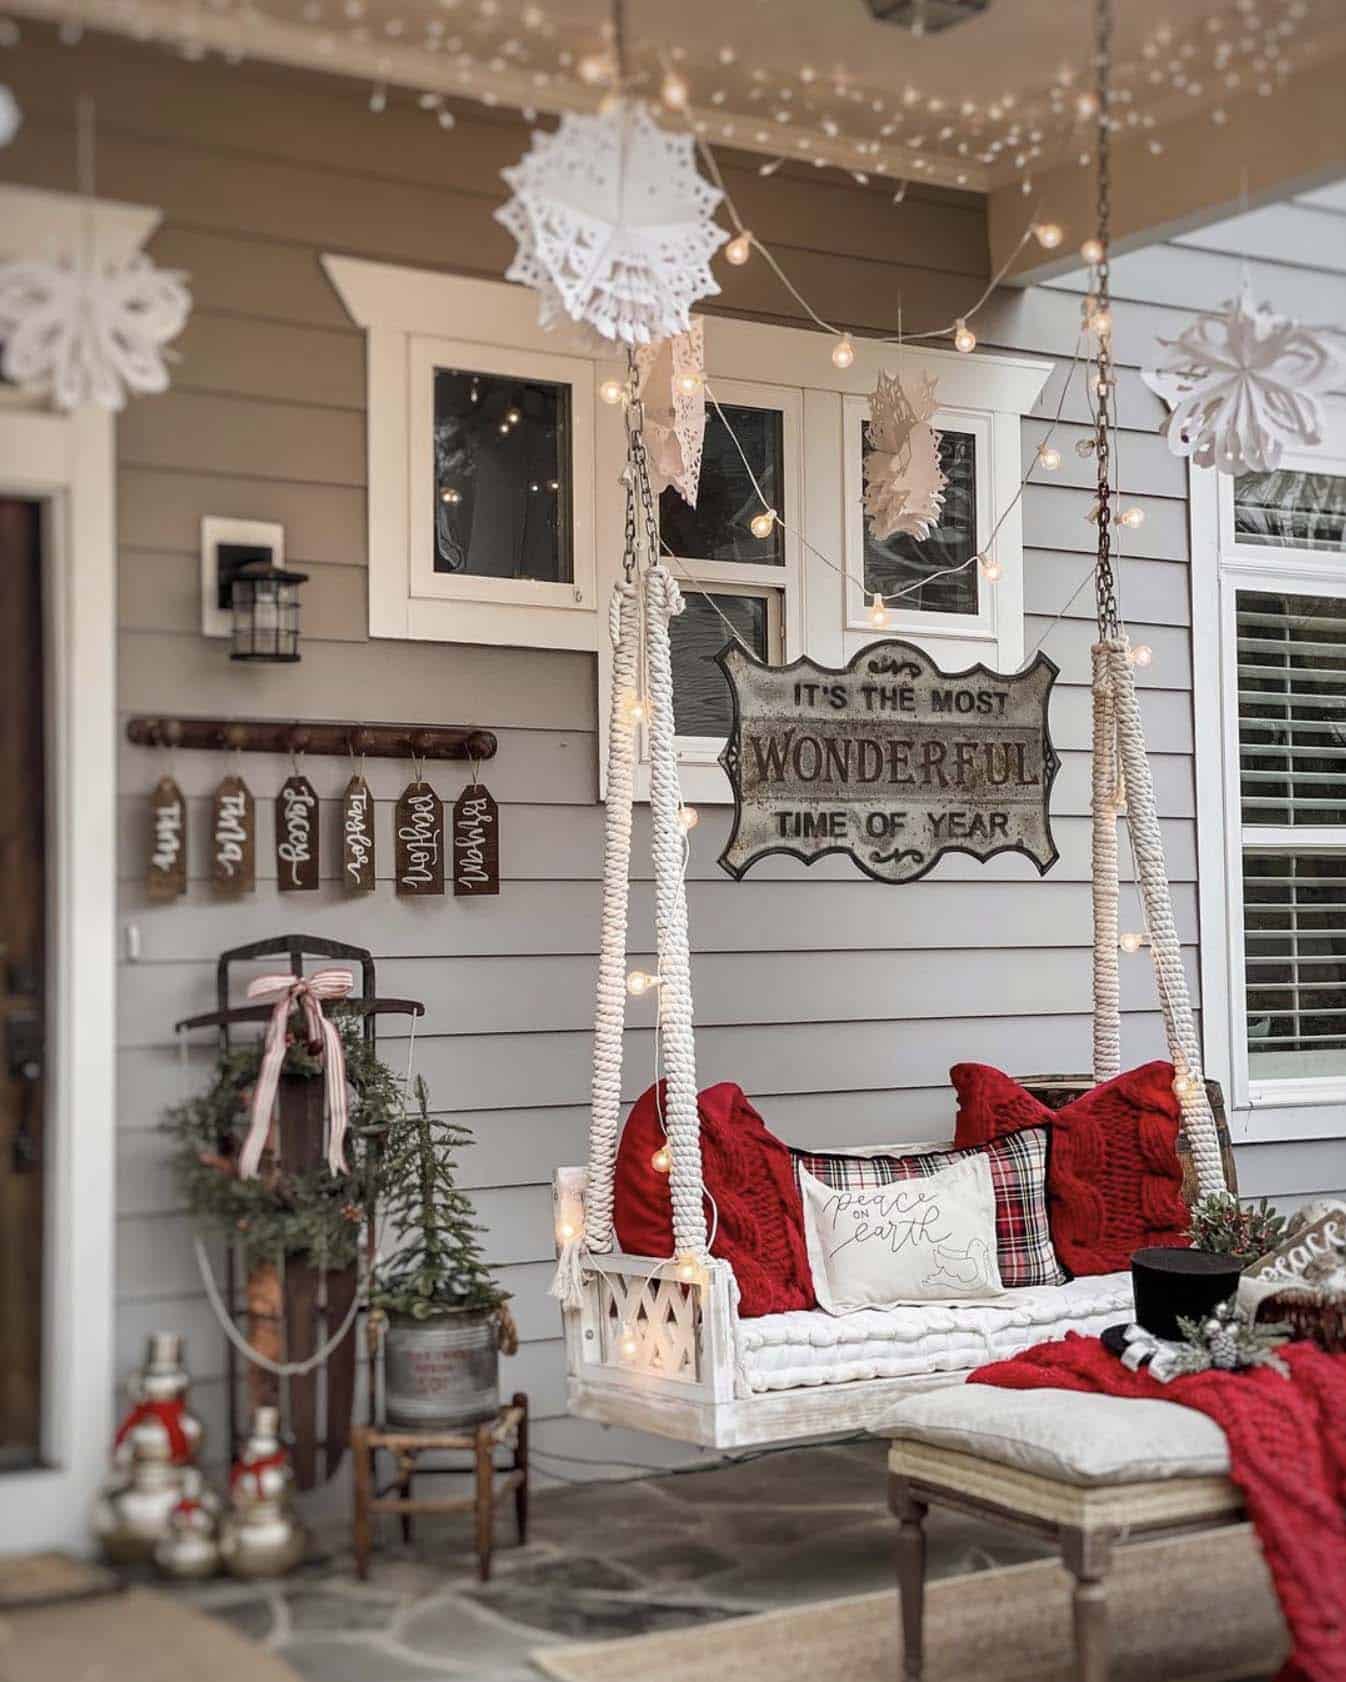 Christmas cozy porch swing with red pillows, a wreath, and a sign